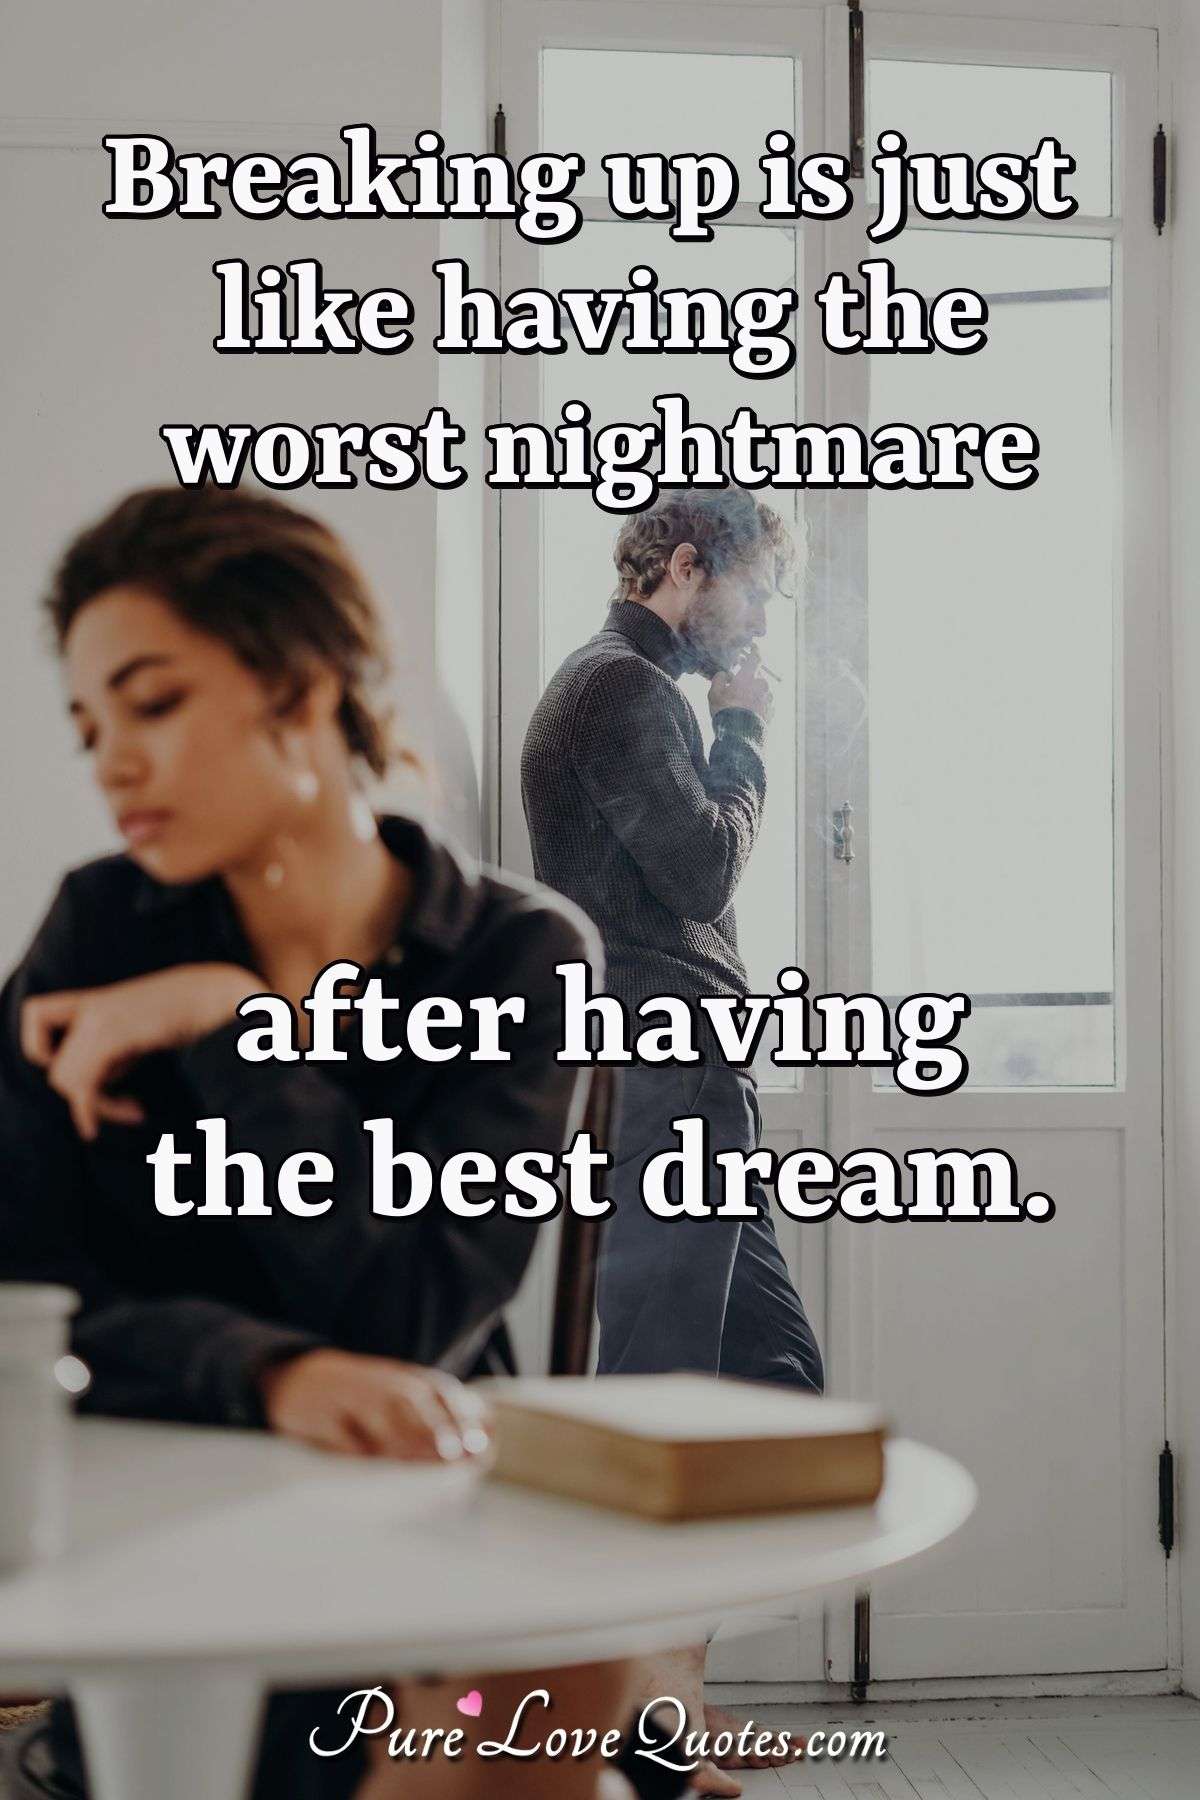 Breaking up is just like having the worst nightmare after having the best dream. - Anonymous